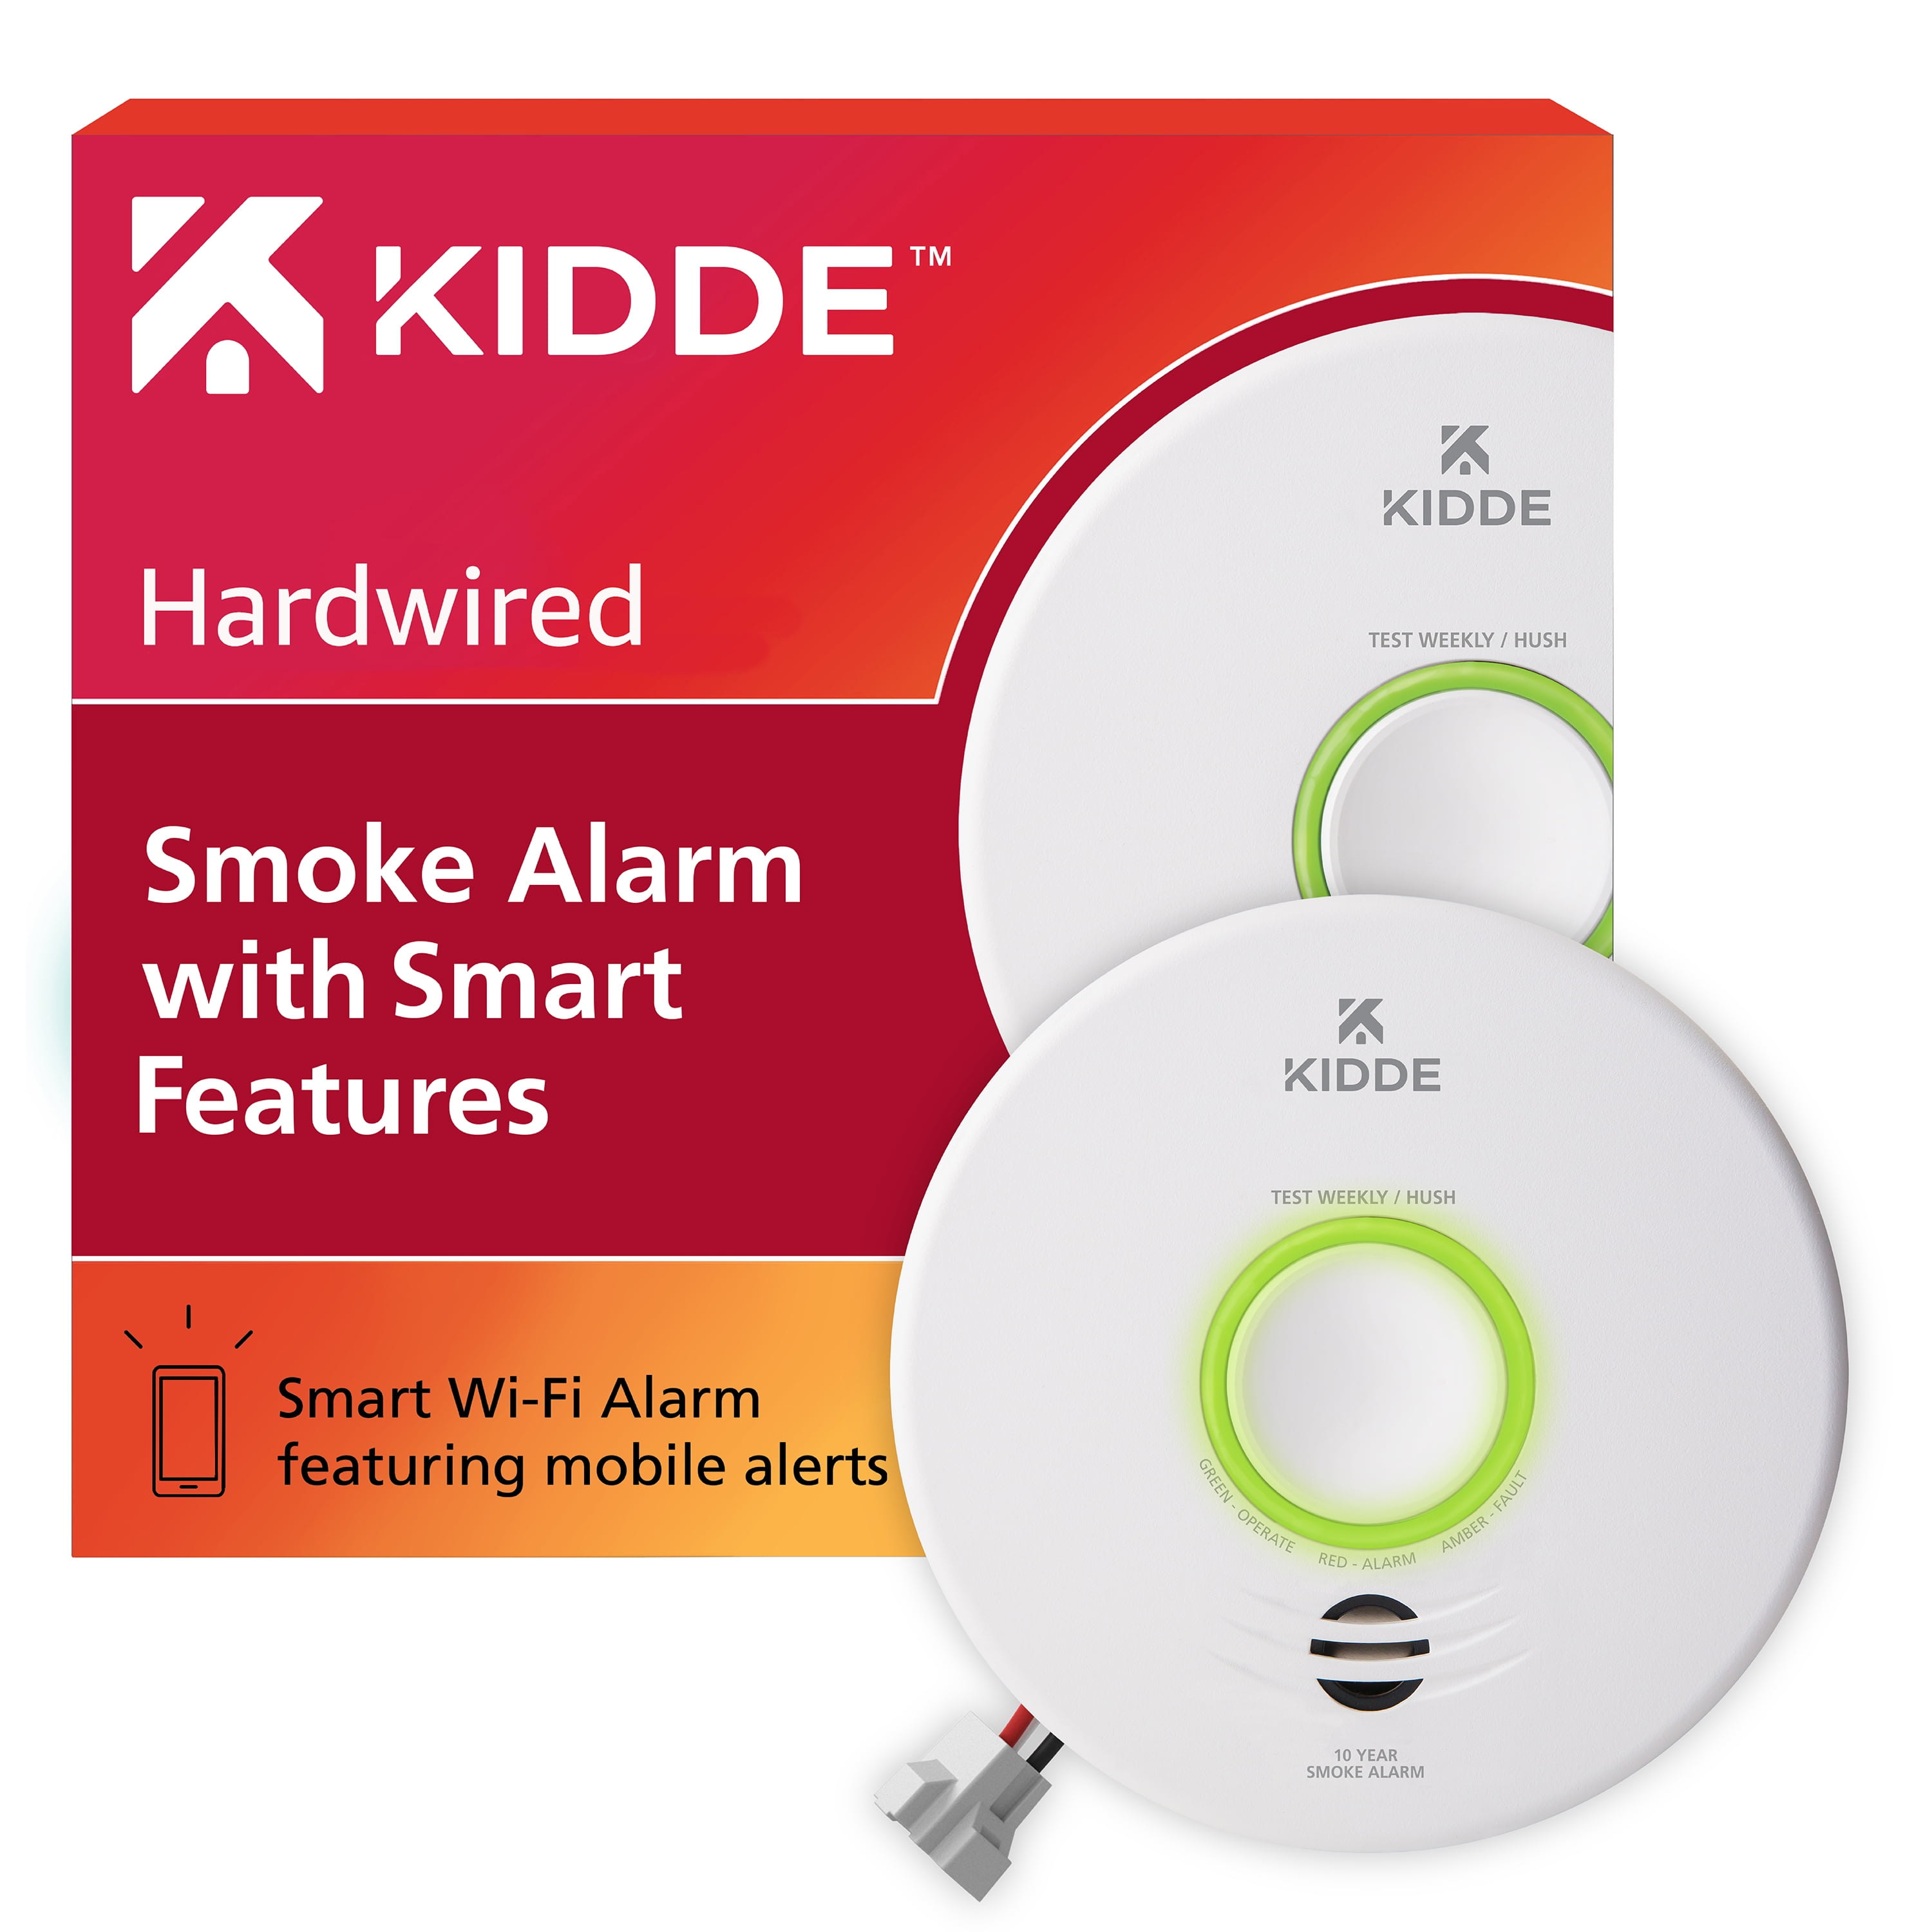 Nest Protect Smoke and CO2 Detector - Freedom Satellite Systems -  Cleveland, OH Metro Area, Service, Nationwide Sales